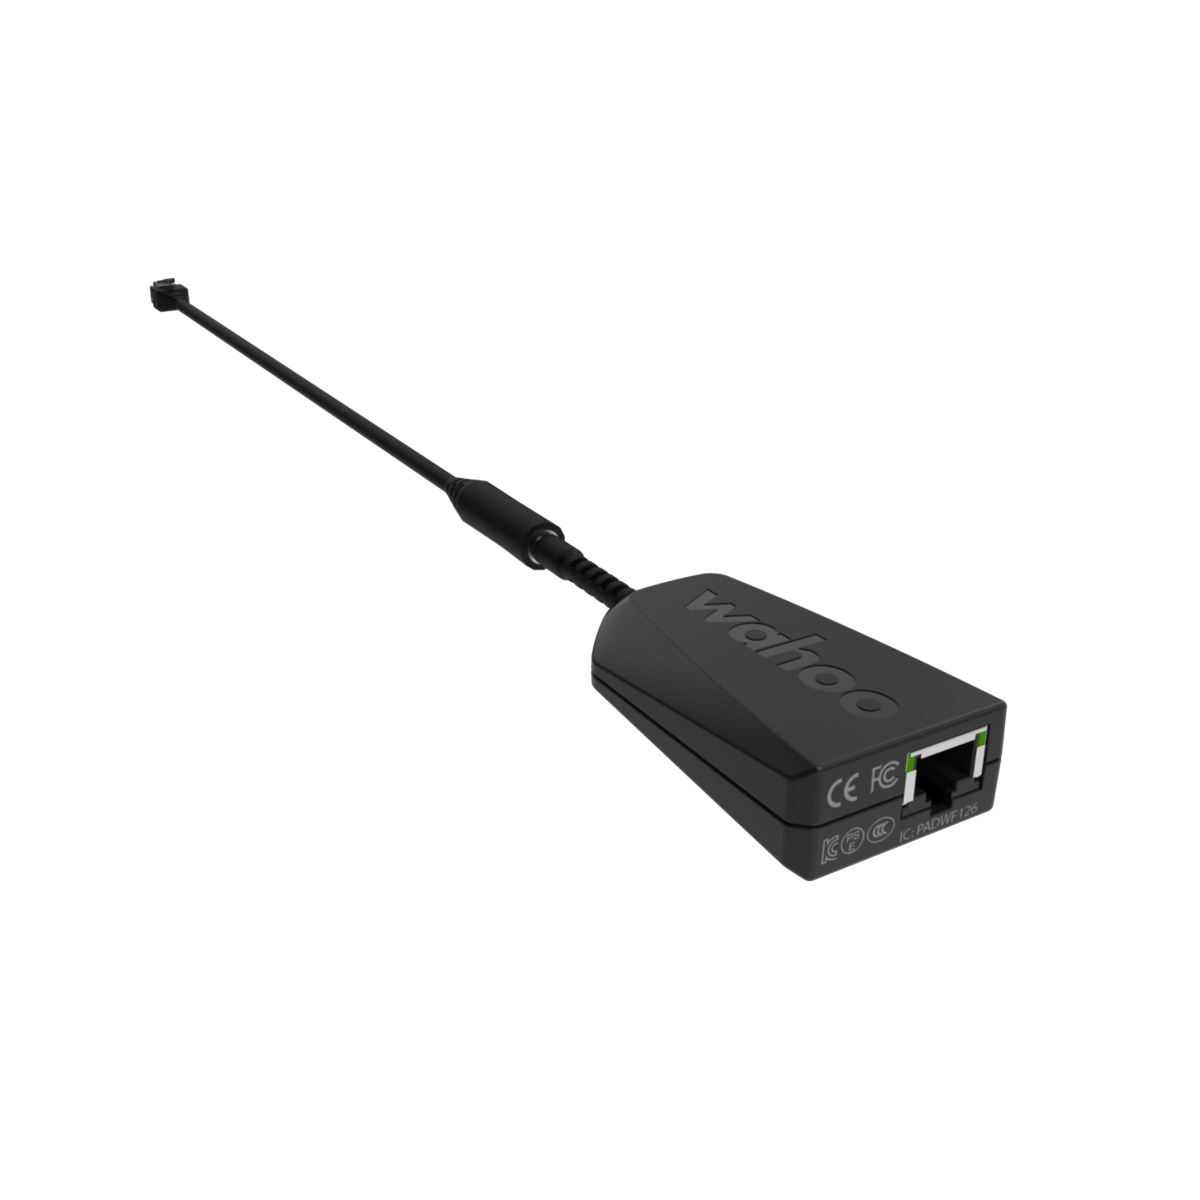 Adapter WAHOO Kickr Direct Connet